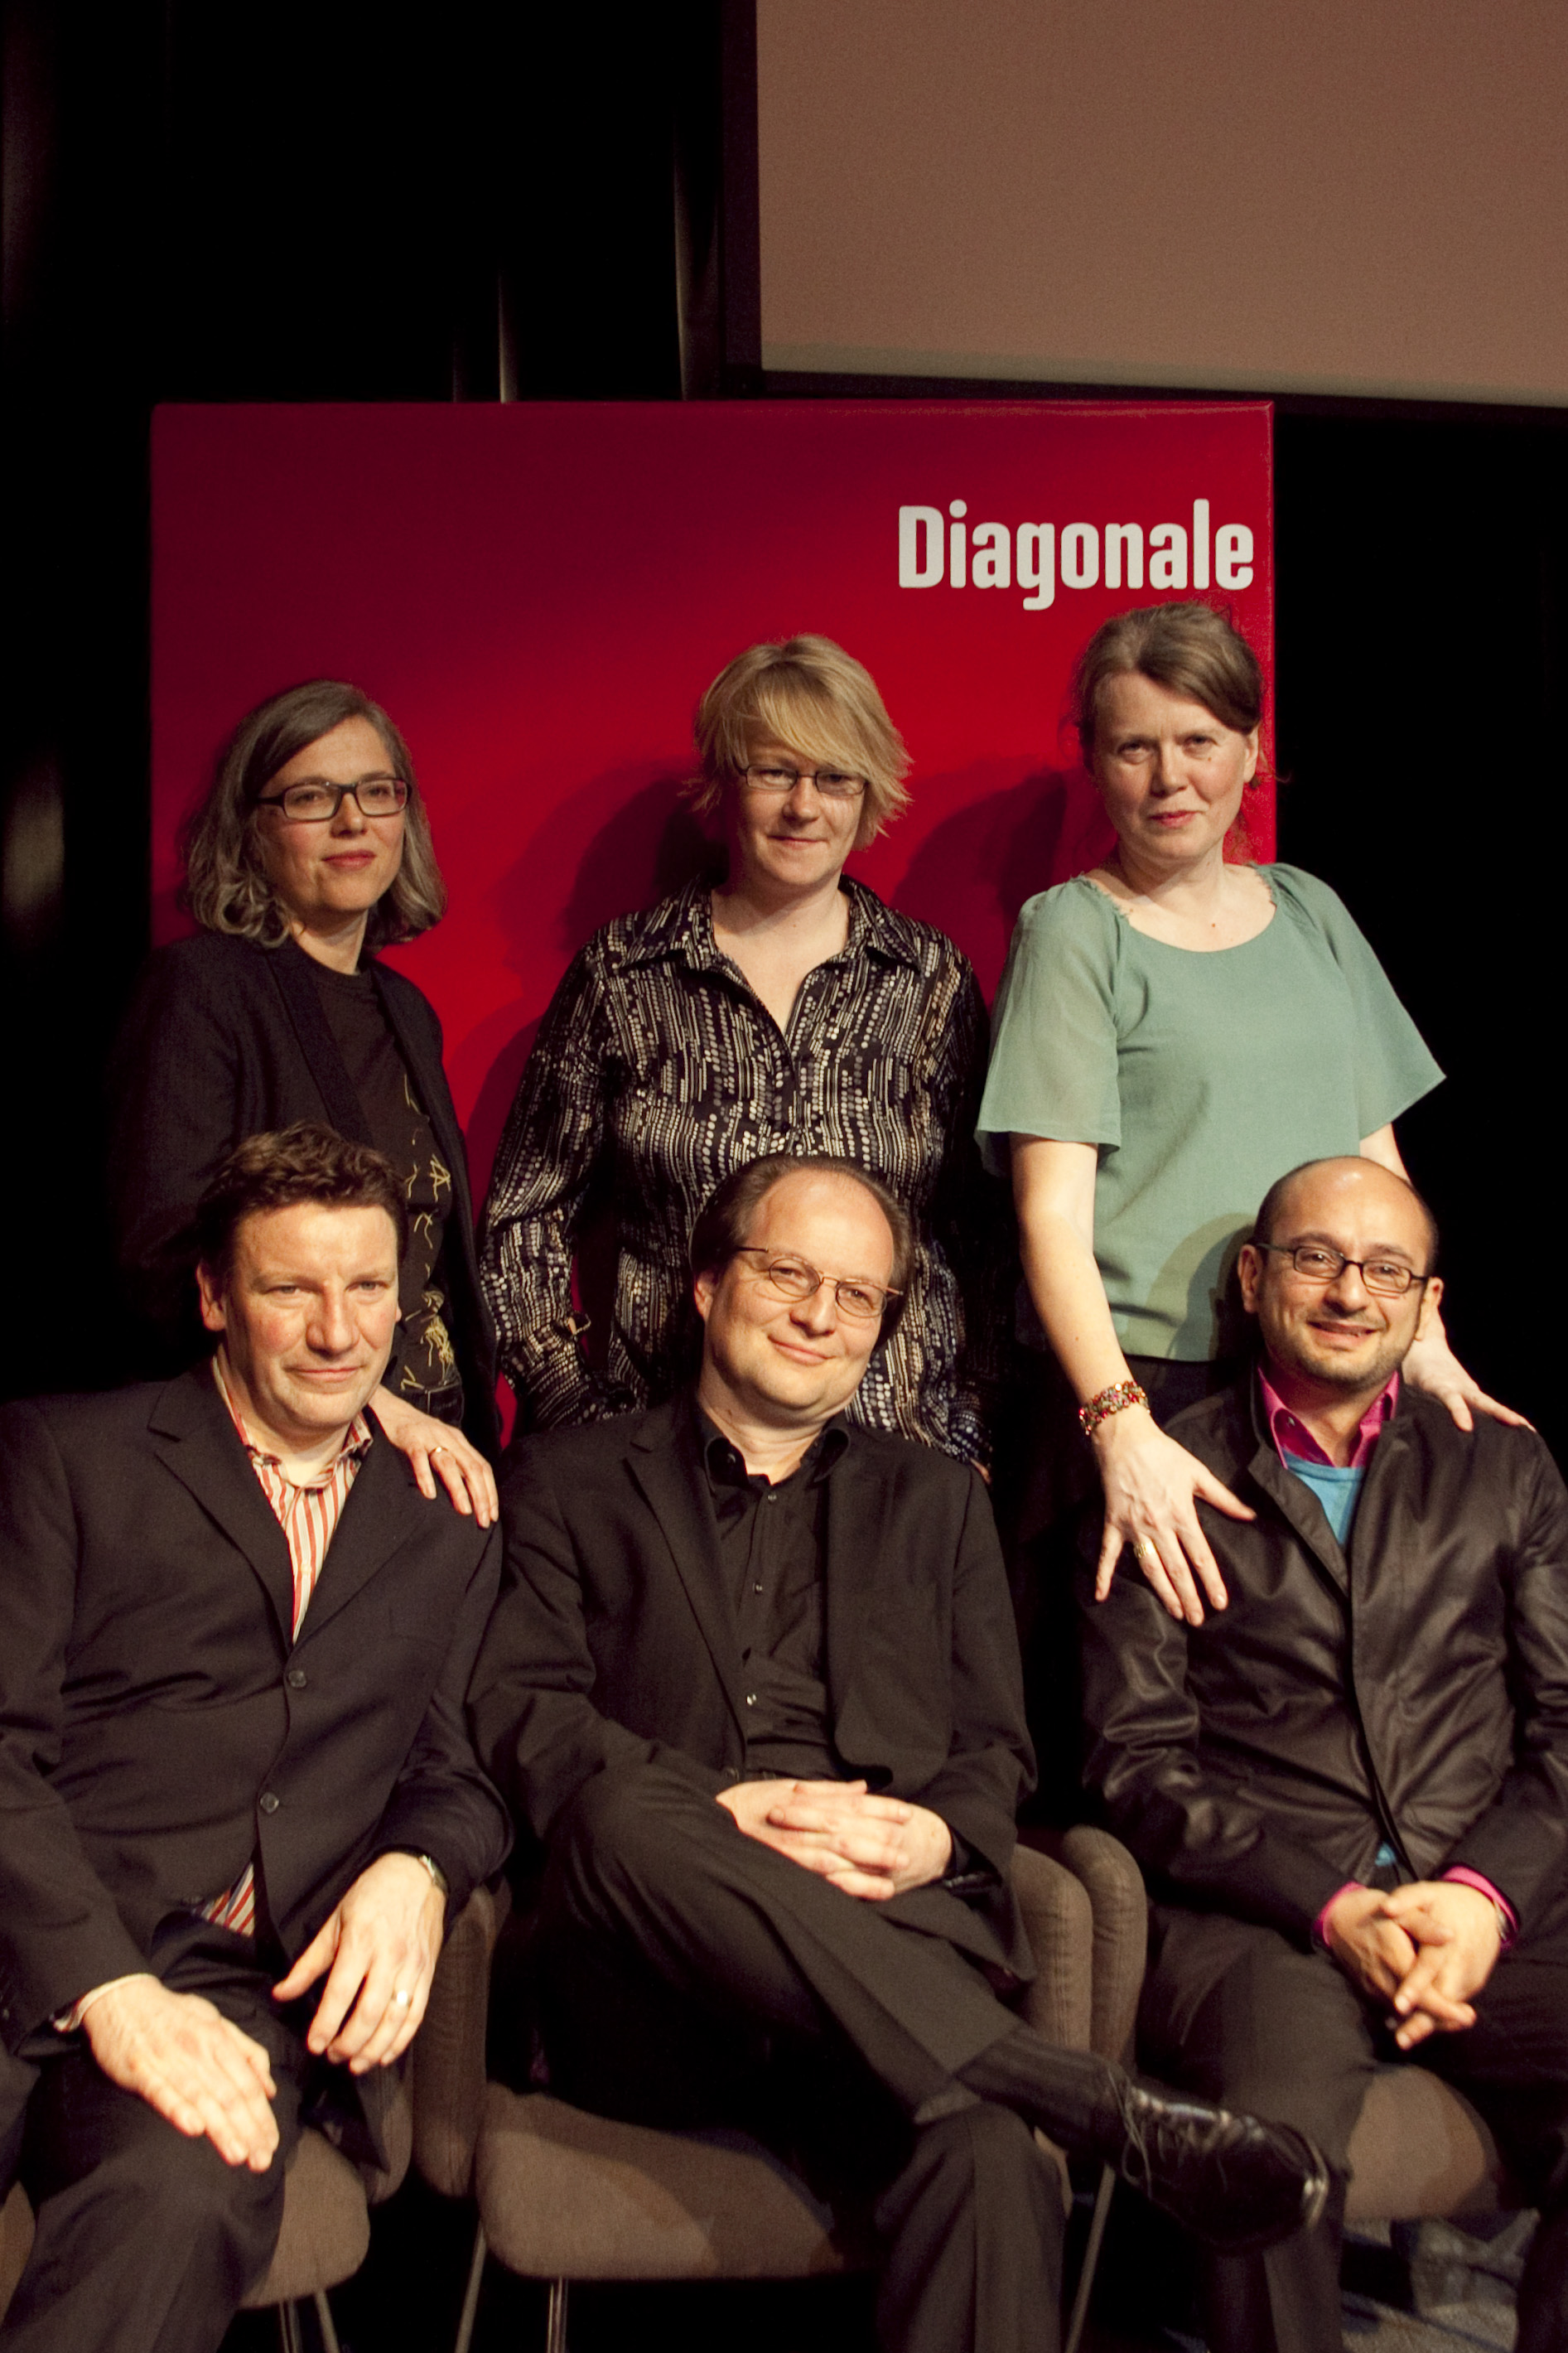 Jury of the fiction film competition of the Diagonale Filmfestival/Austria